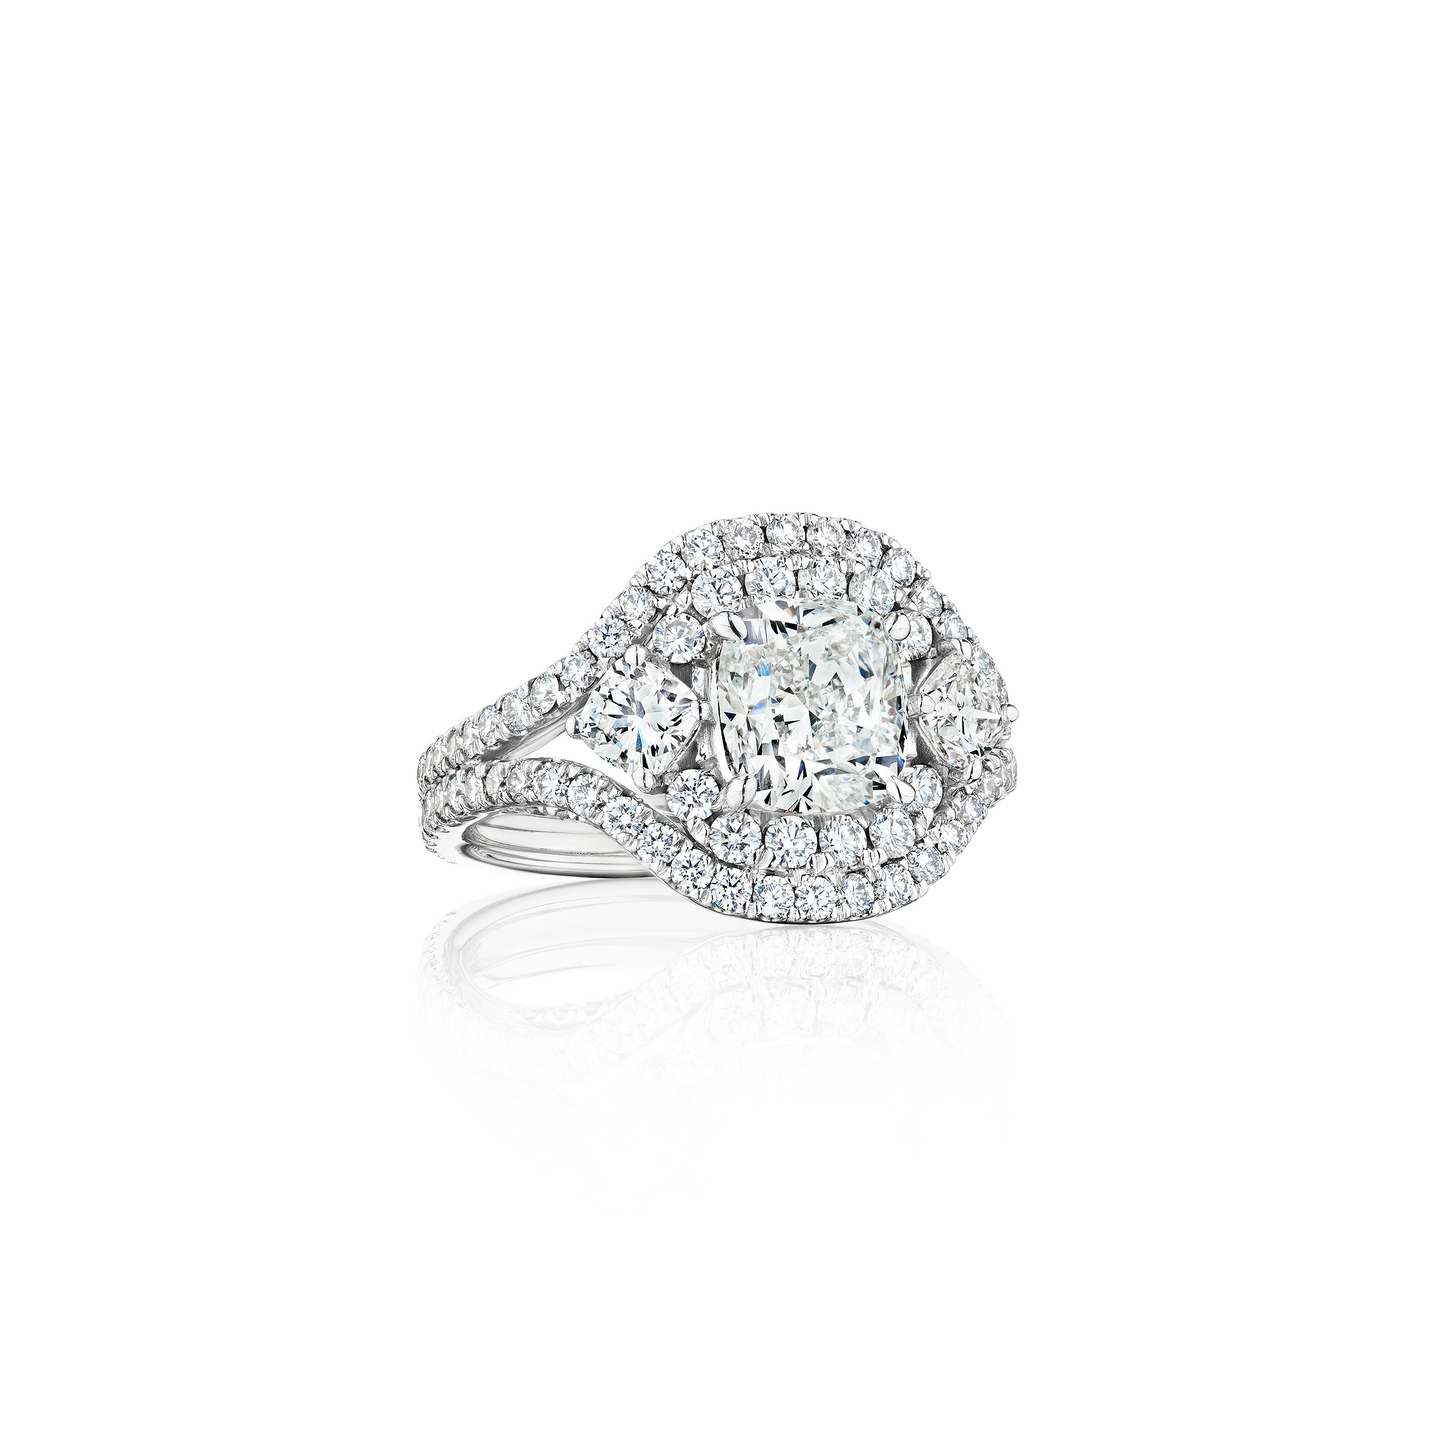 Fink's Exclusive White Gold Double Halo Cushion Diamond Engagement Ring